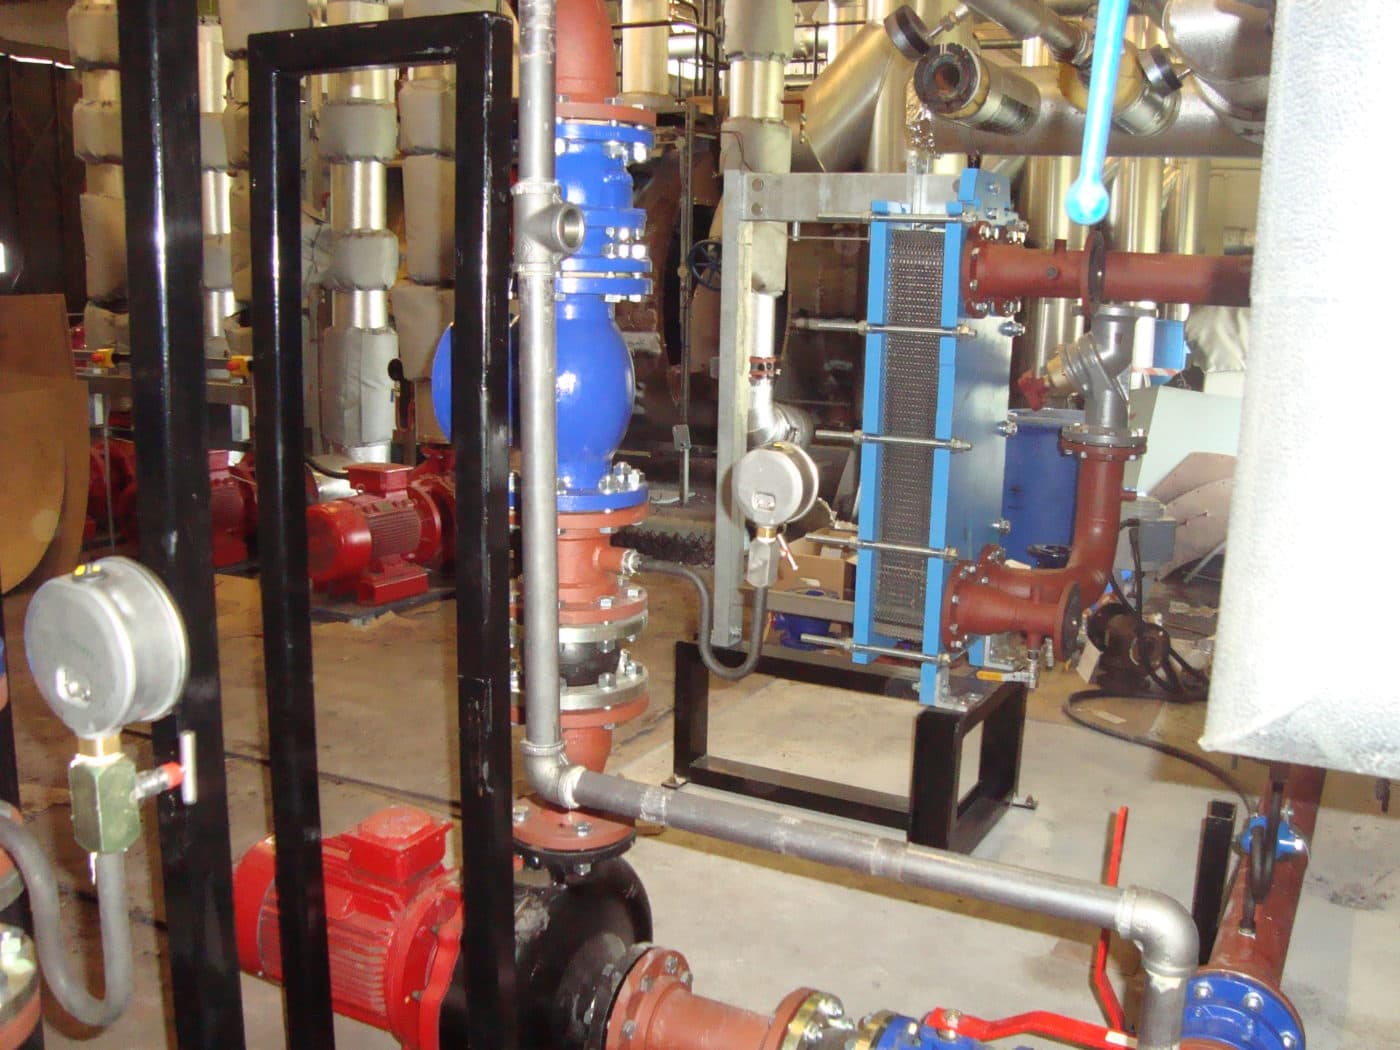 Heating Distribution Plant Room inc. Plate Heat Exchanger & Pipe Insulation - Hot Water - Government Facility